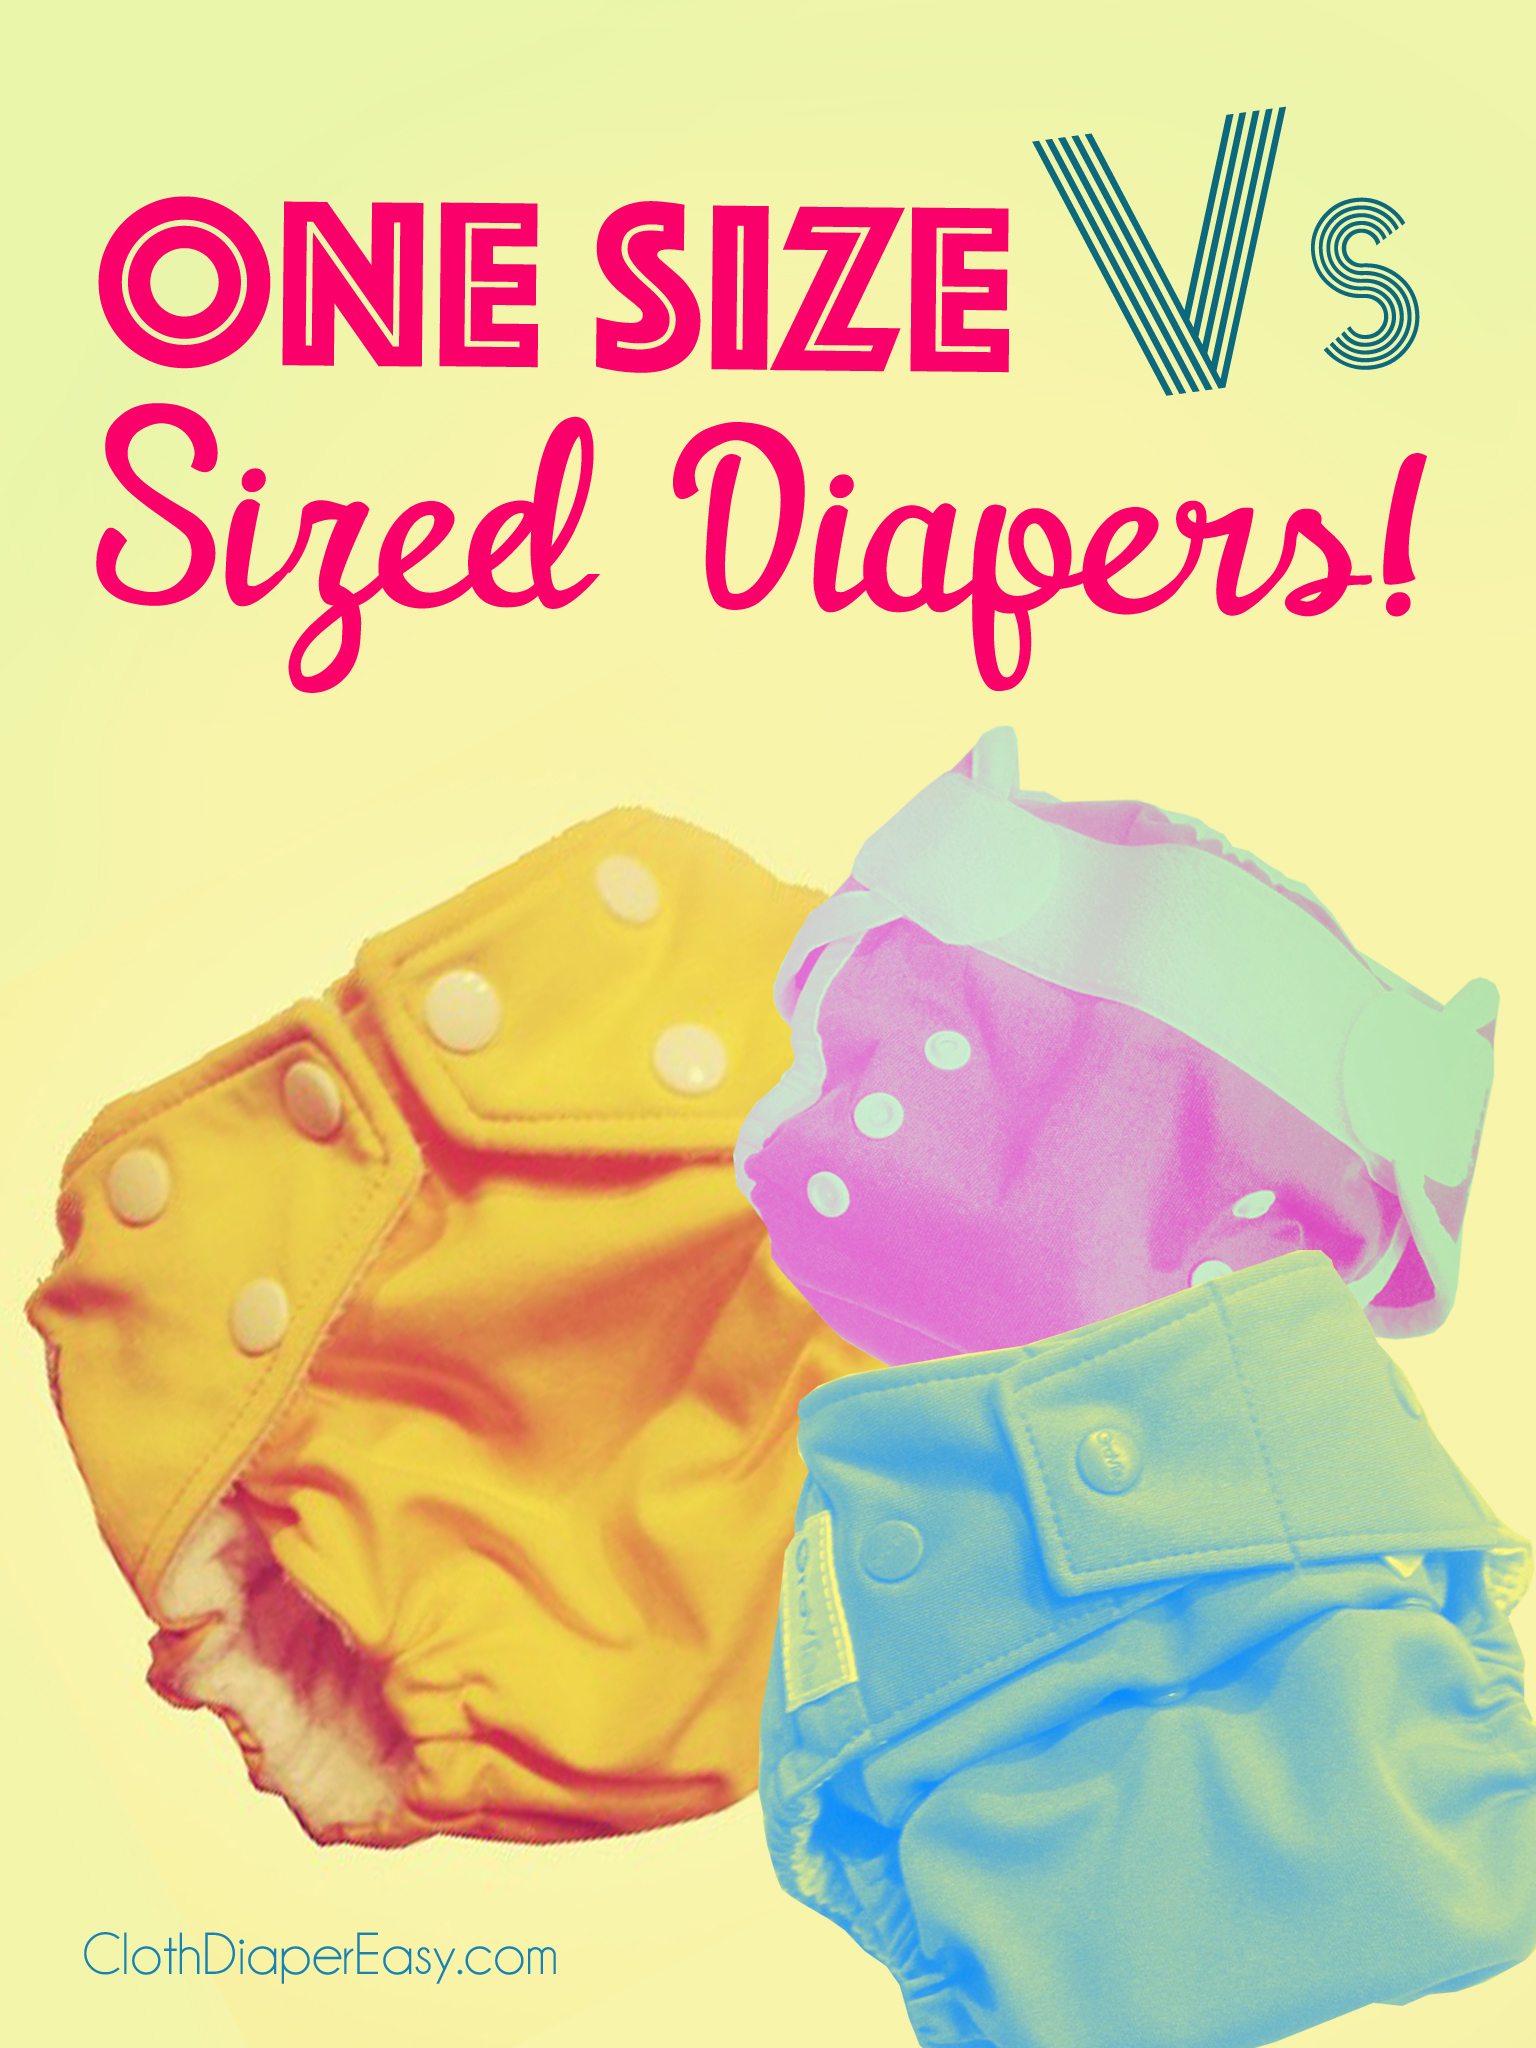 One Size Cloth Diapers